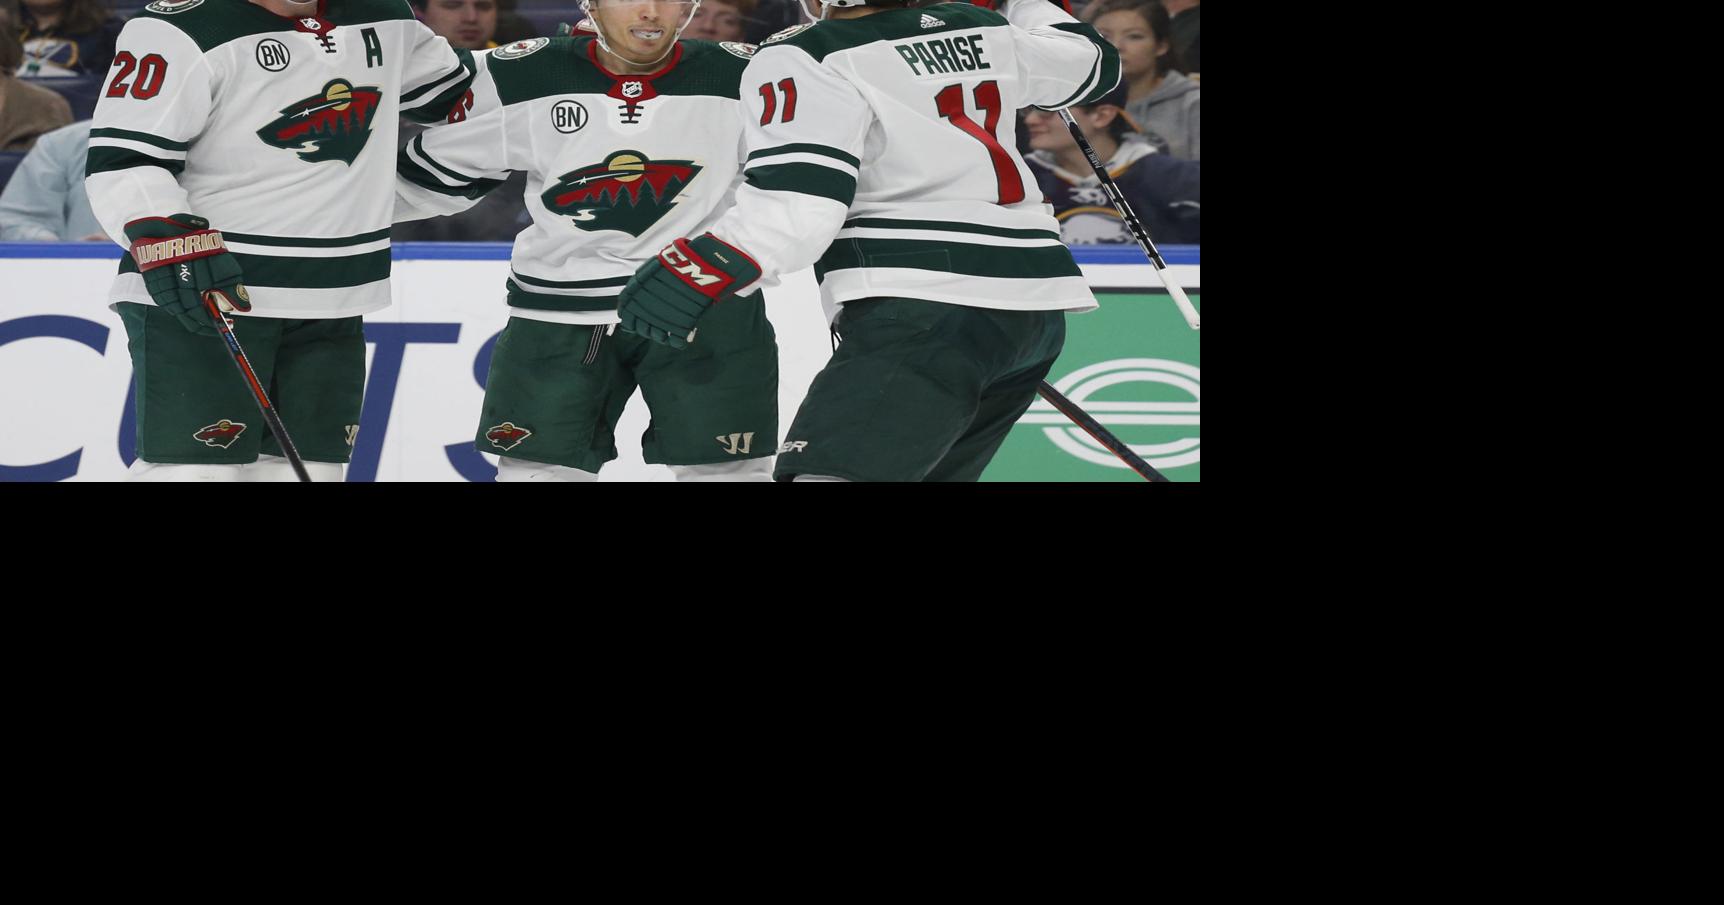 What's Wrong With the Wild Keeping Dumba in a Walk Year? - Zone Coverage